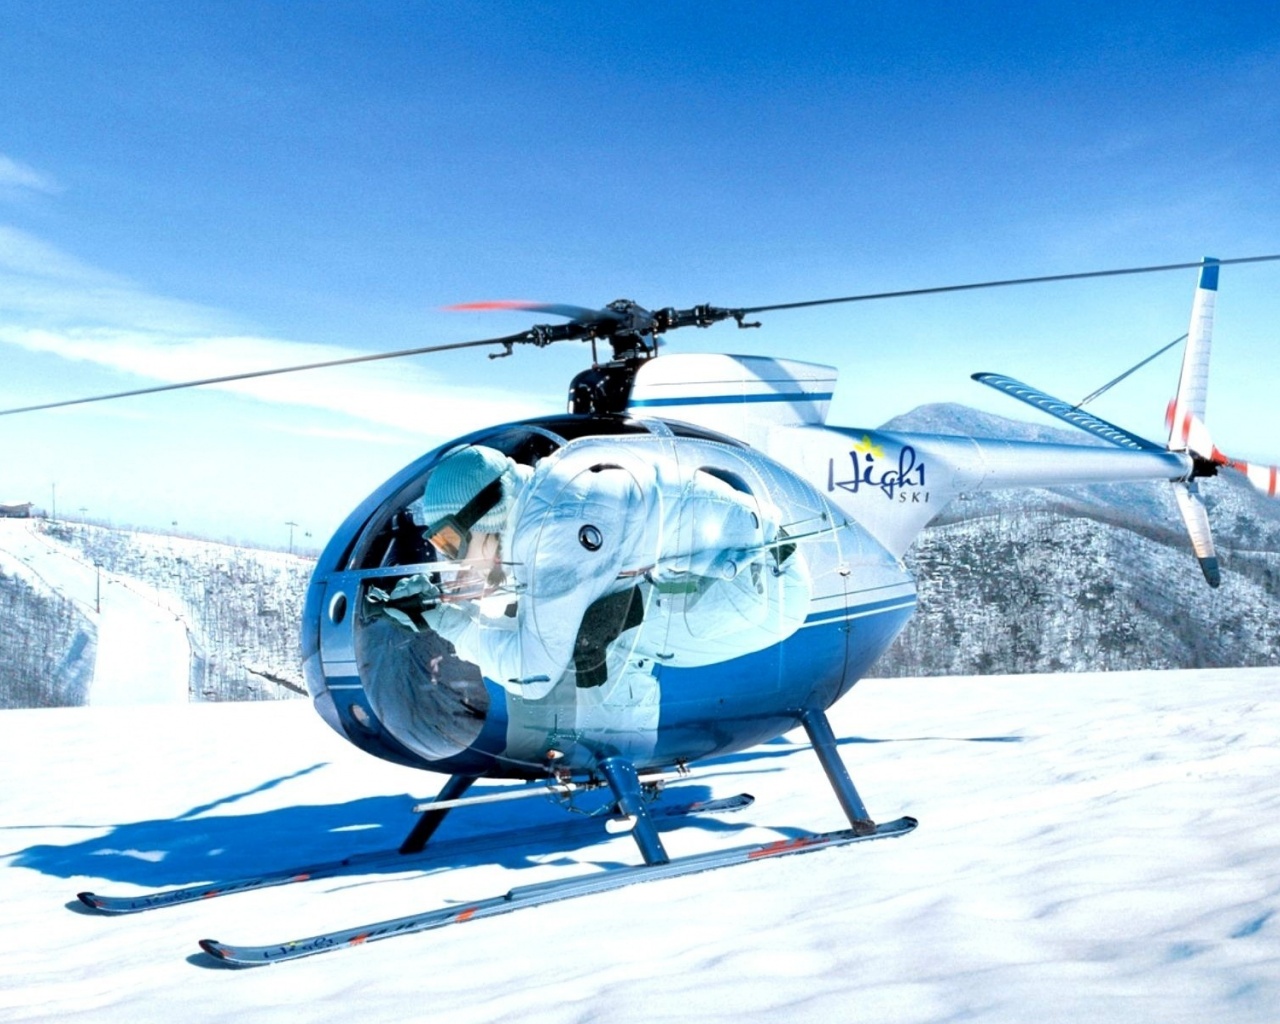 Mini Helicopters On The Snow Capped Mountain